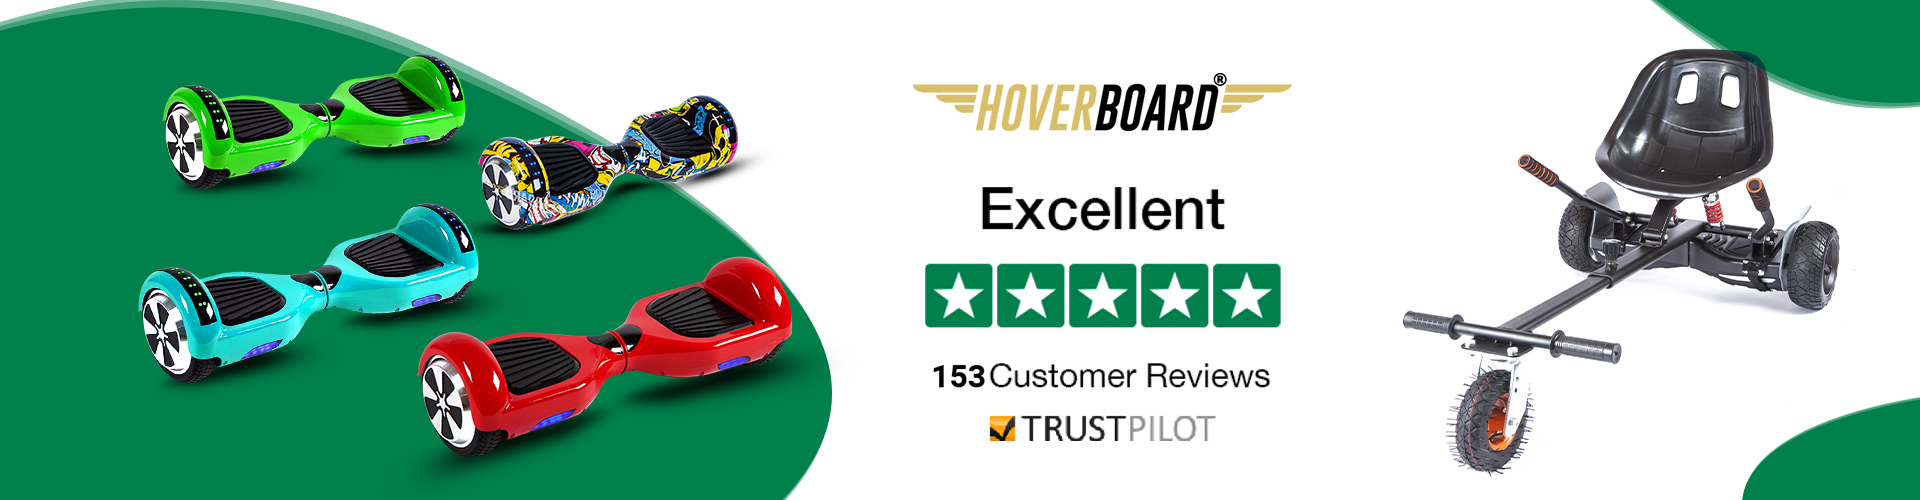 Back To The Future Hoverboard with 5 star rating